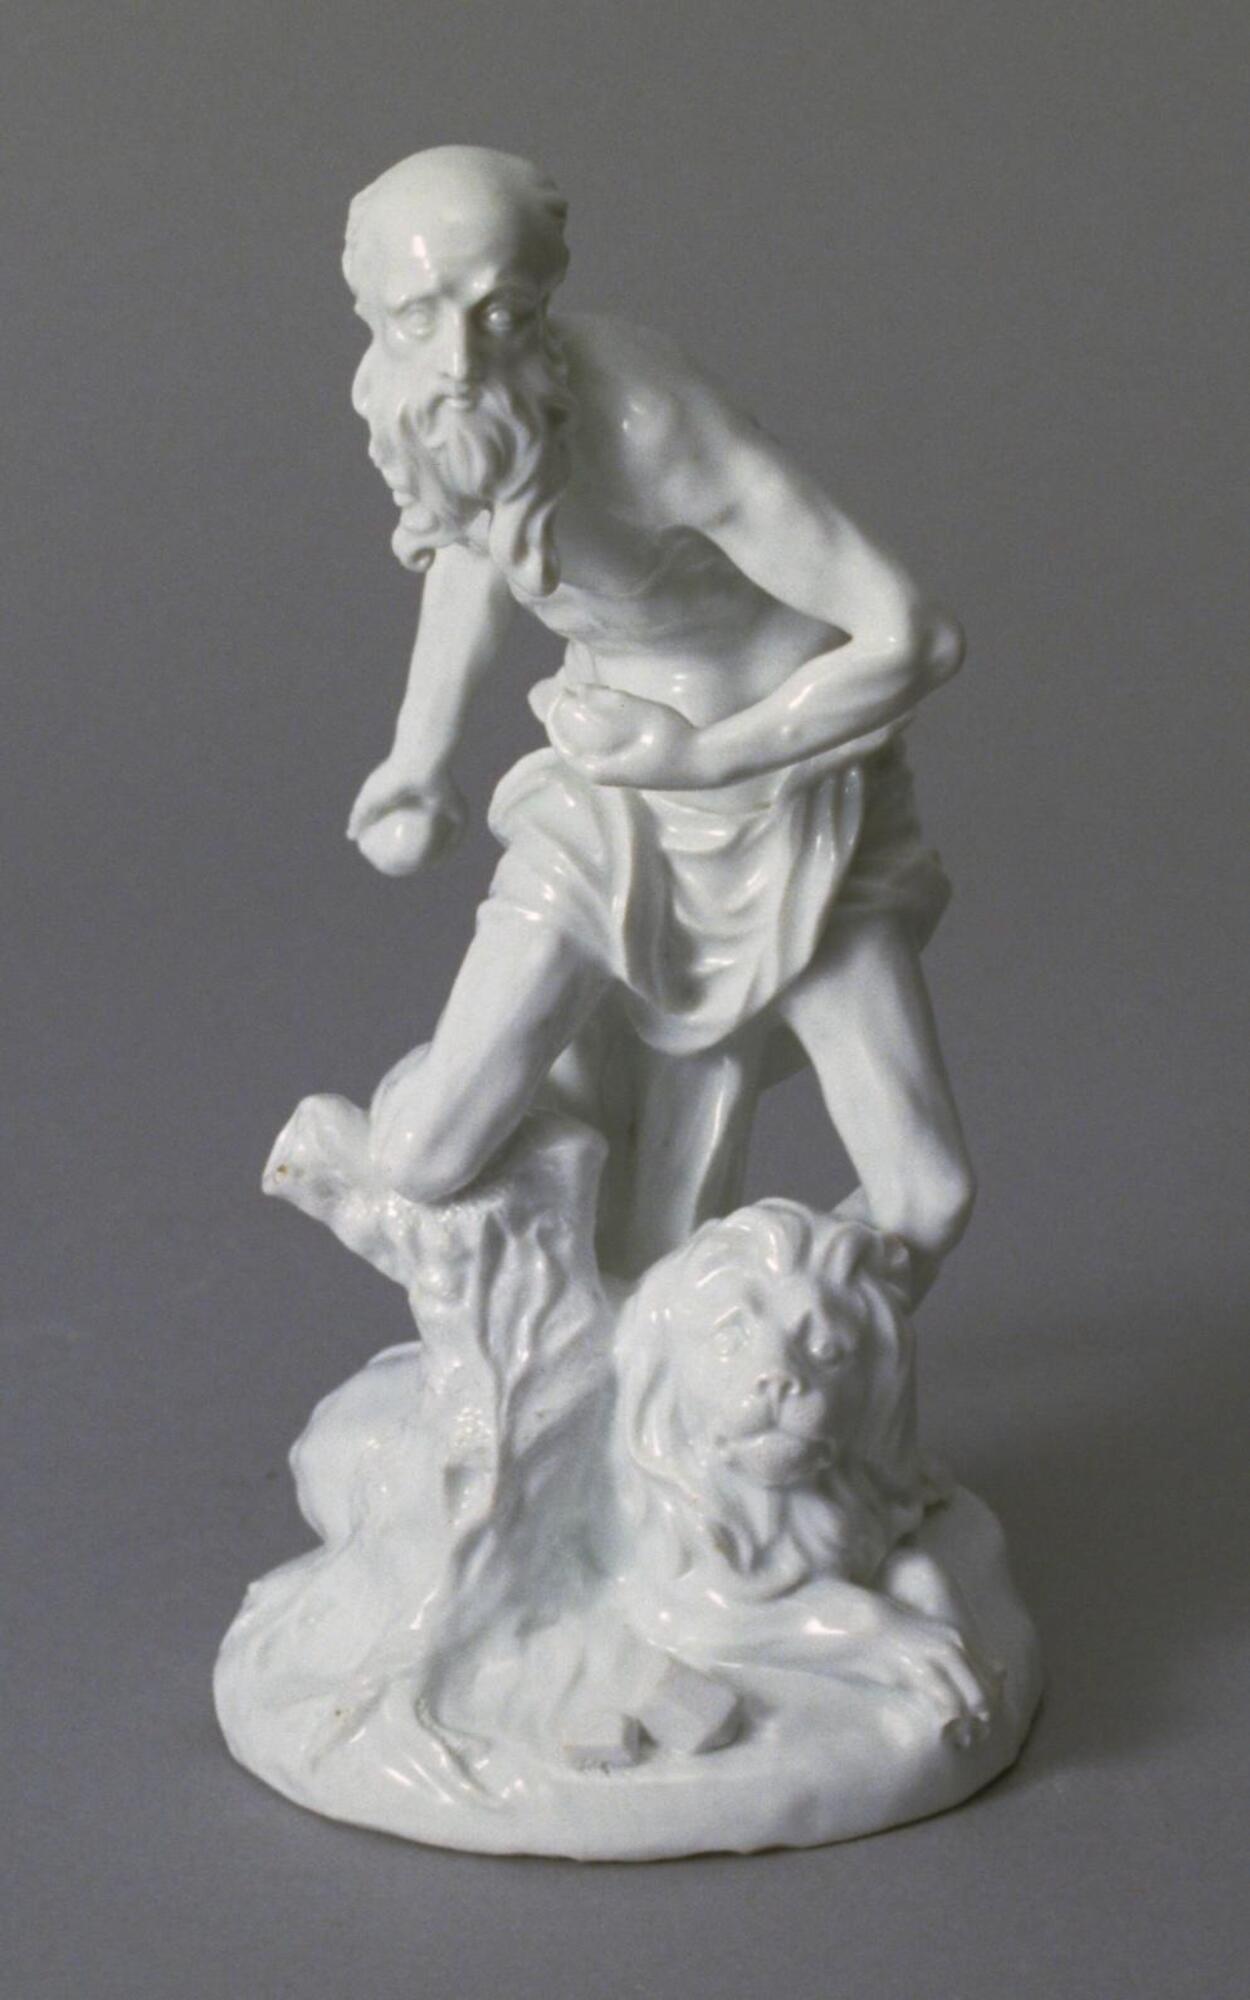 This small porcelain sculpture represents a gaunt, sinewy bearded figure, who is naked except for a loincloth. With his right knee wedged in a stump, his torso contracts with an inner tension as he pounds his chest with stones in an act of penitence. At his feet sits a lion.